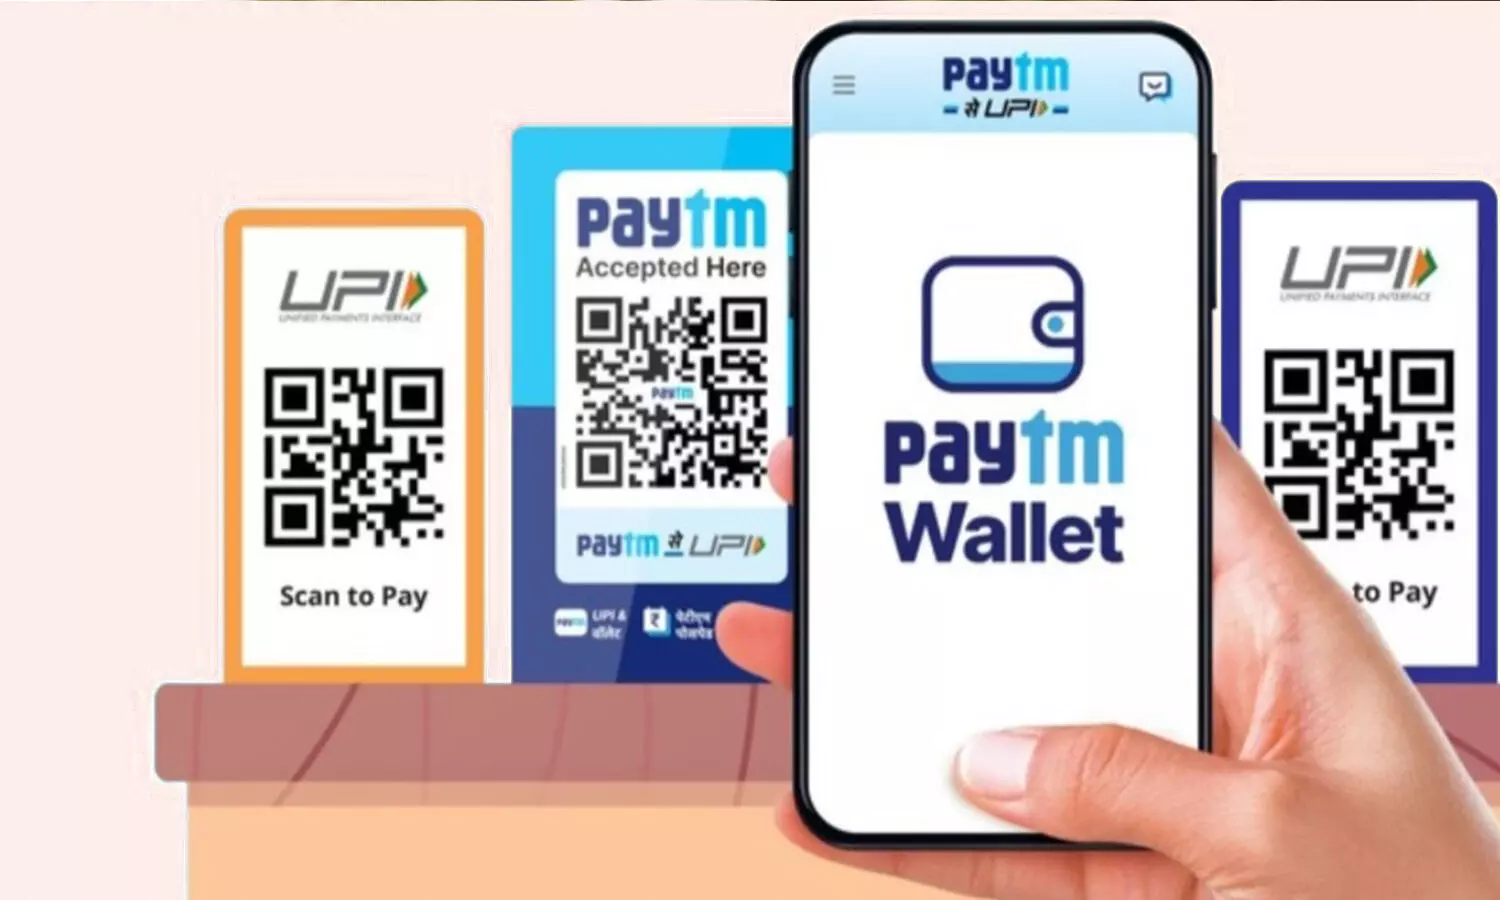 Update on Paytm UPI Replacement: HDFC, Yes Bank submit Application